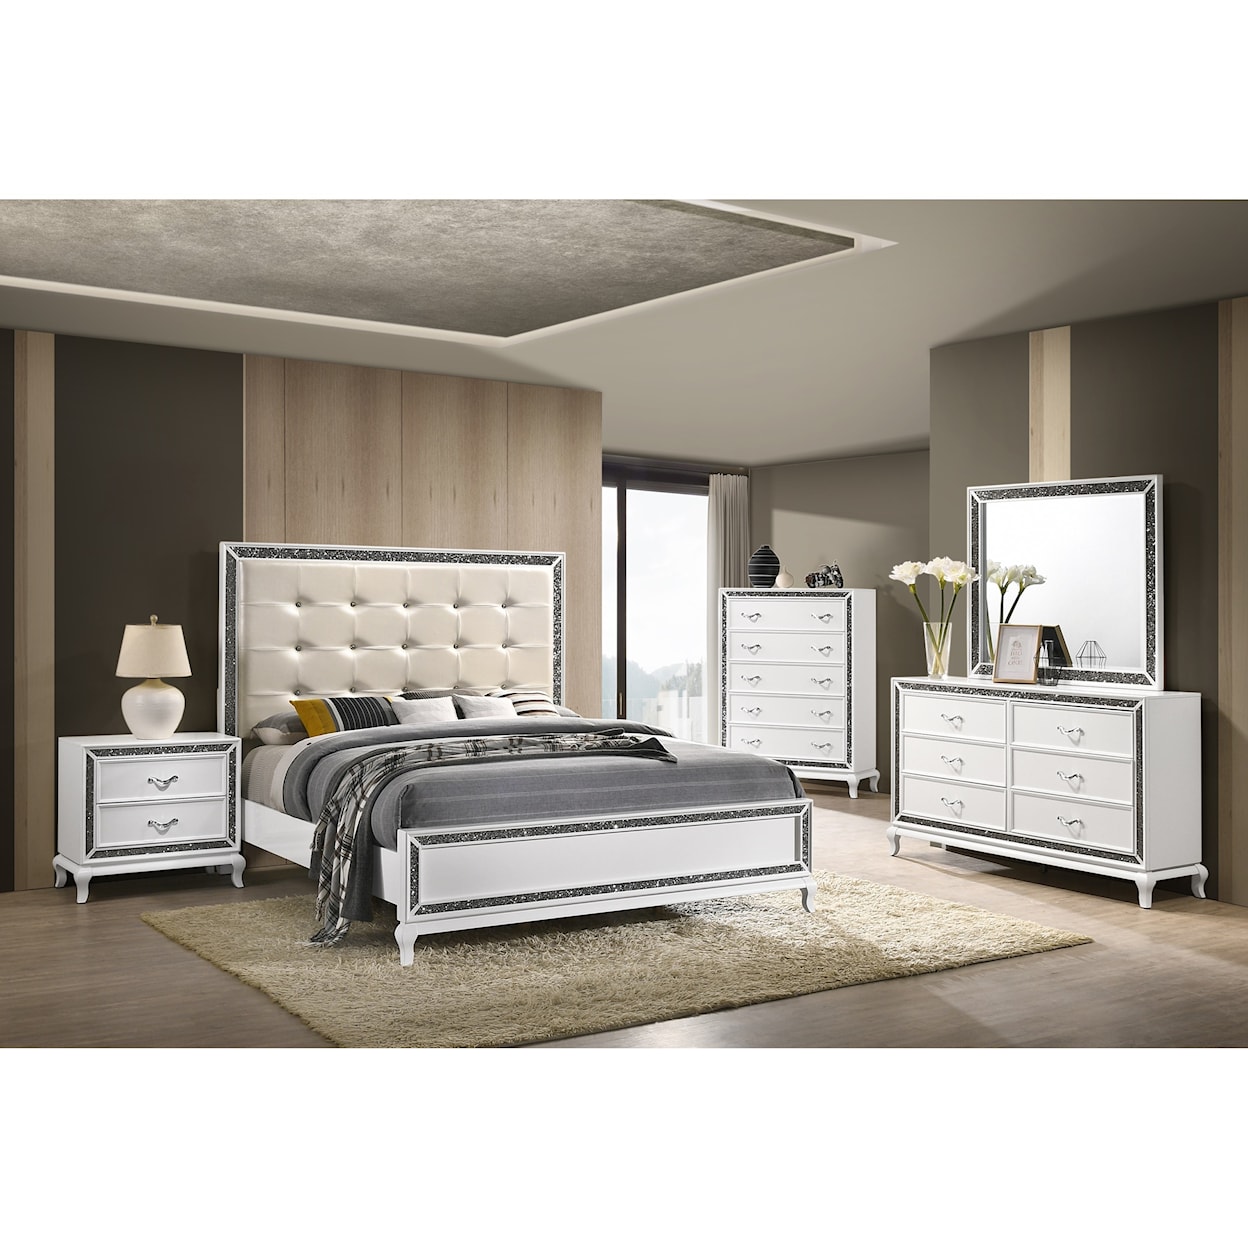 New Classic Park Imperial King Bedroom Group